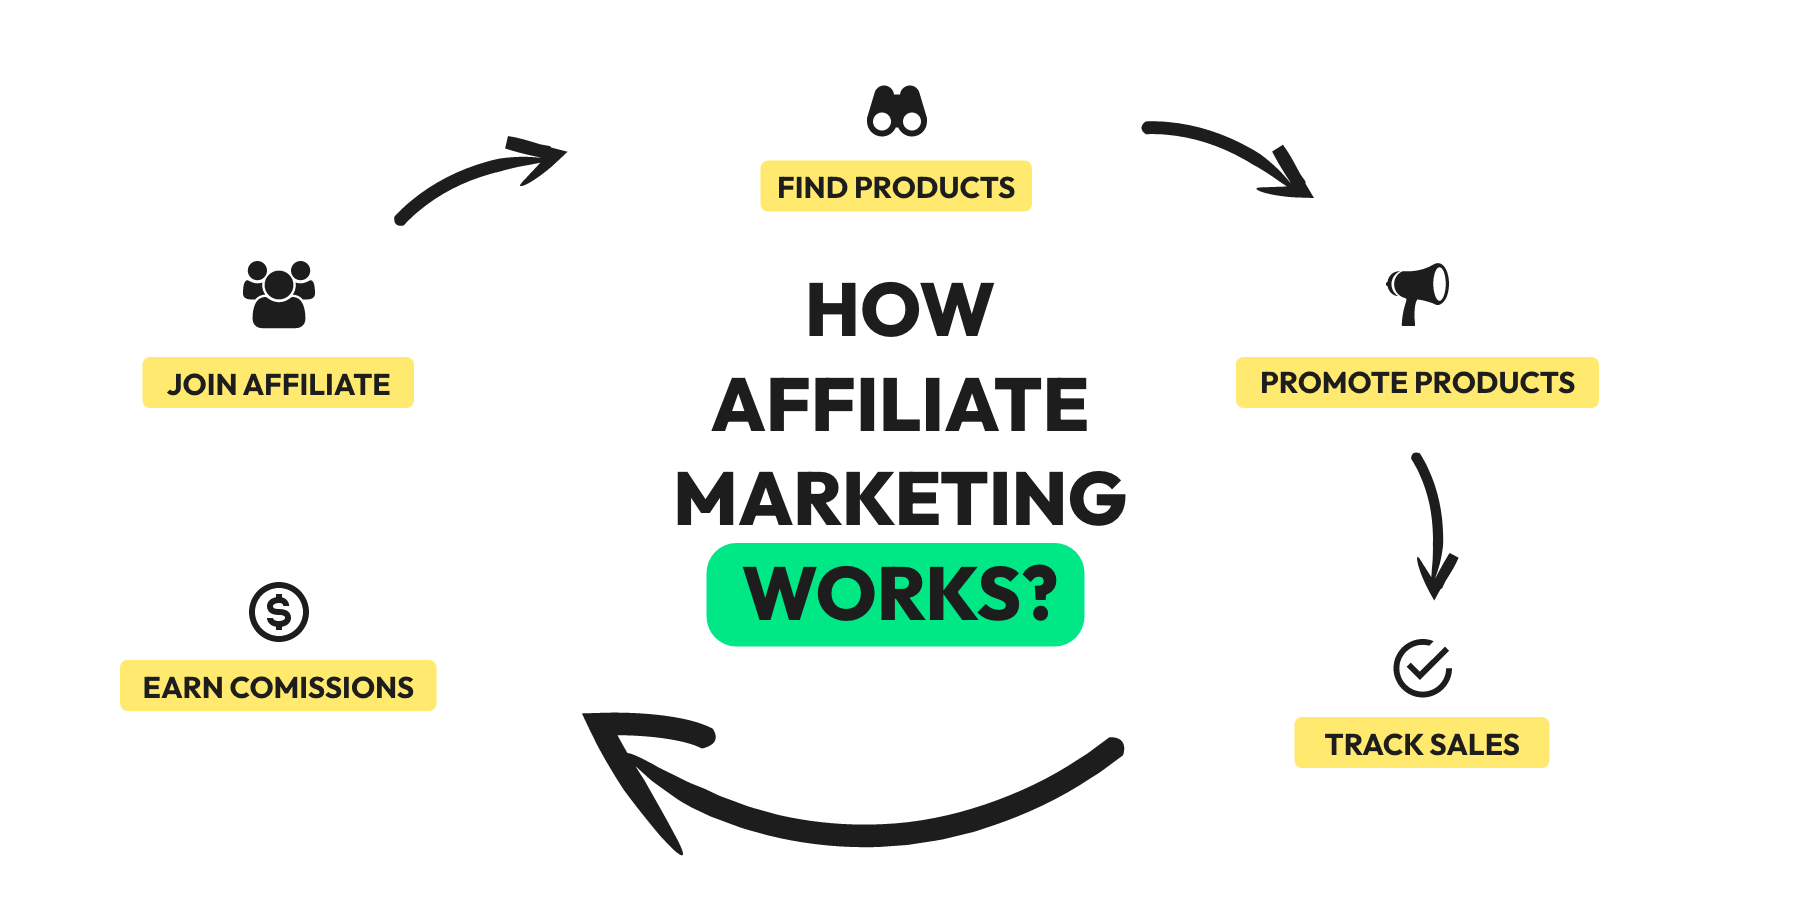 How affiliate marketing works, find products, promote products, track sales, earn commissions, join affiliates, wati affiliates.